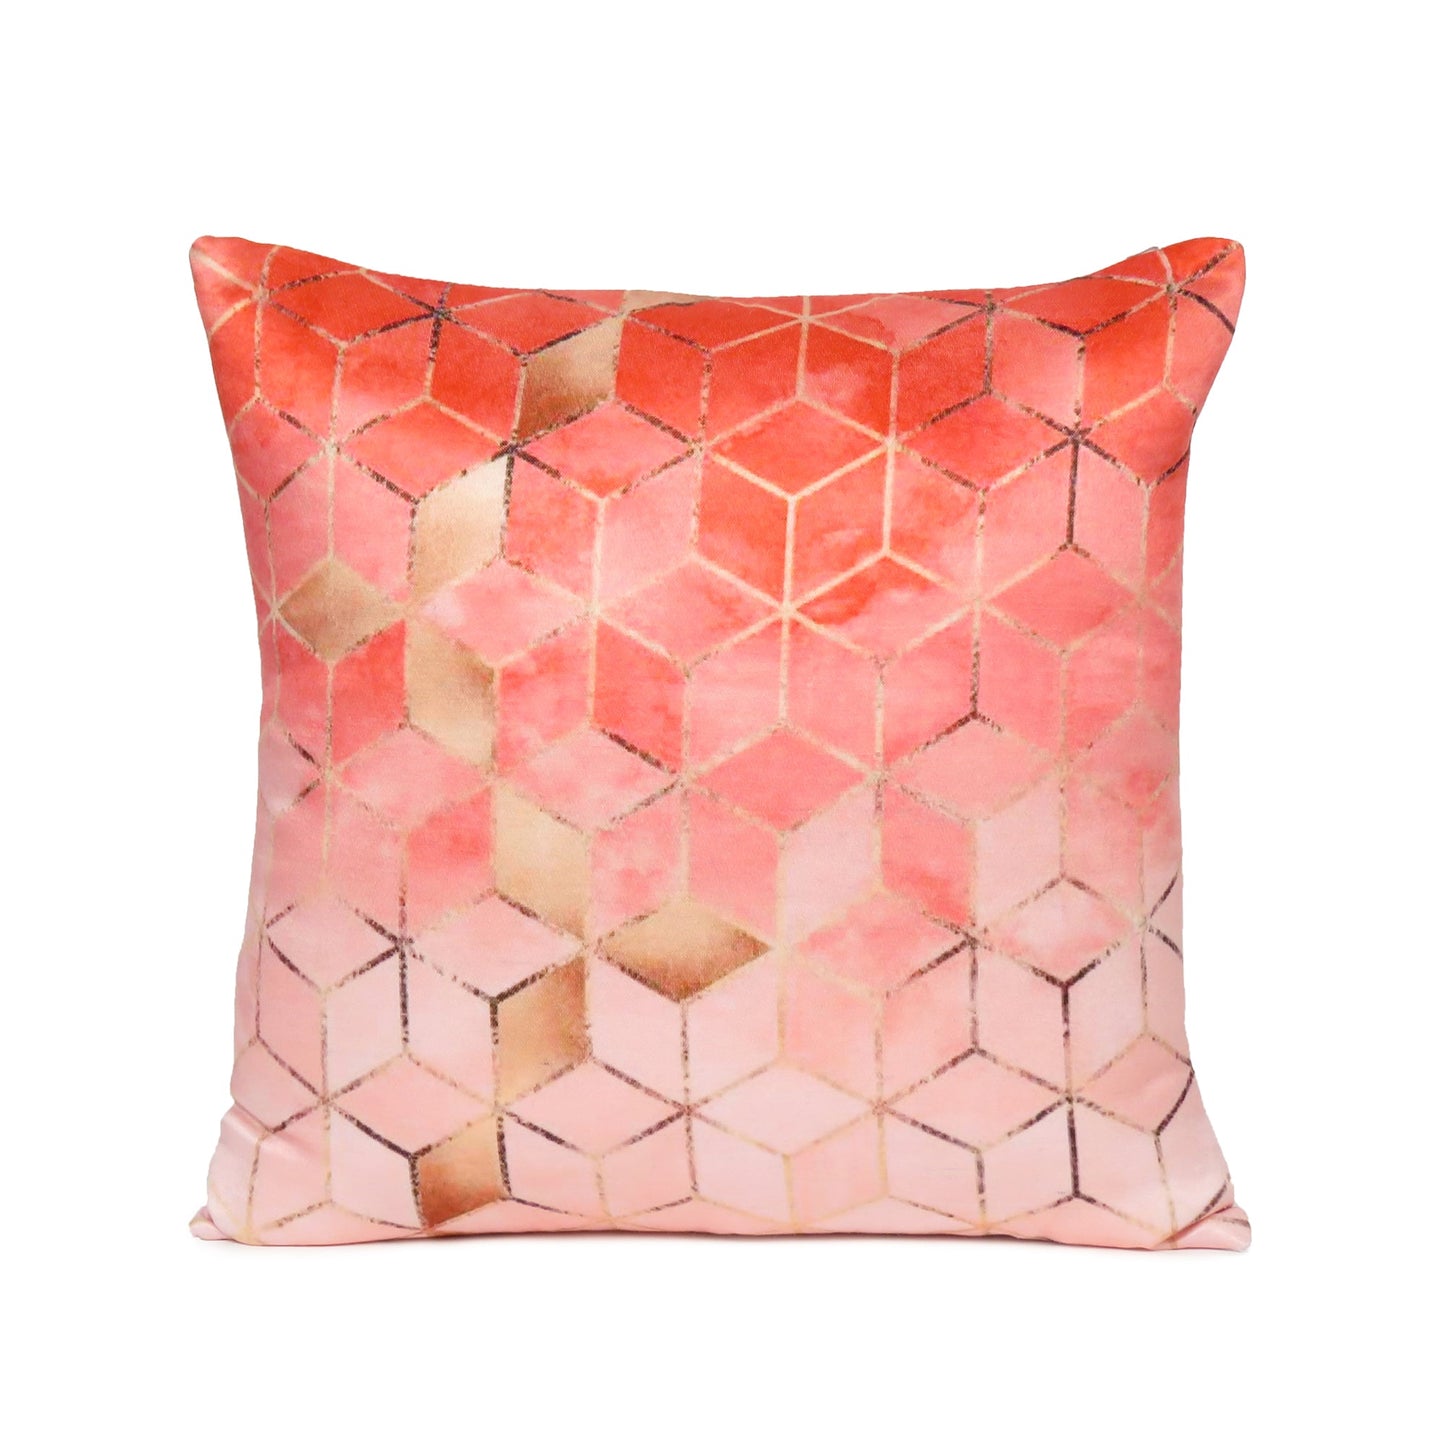 Light Pink Geometric Printed Cushion Cover in Set of 2